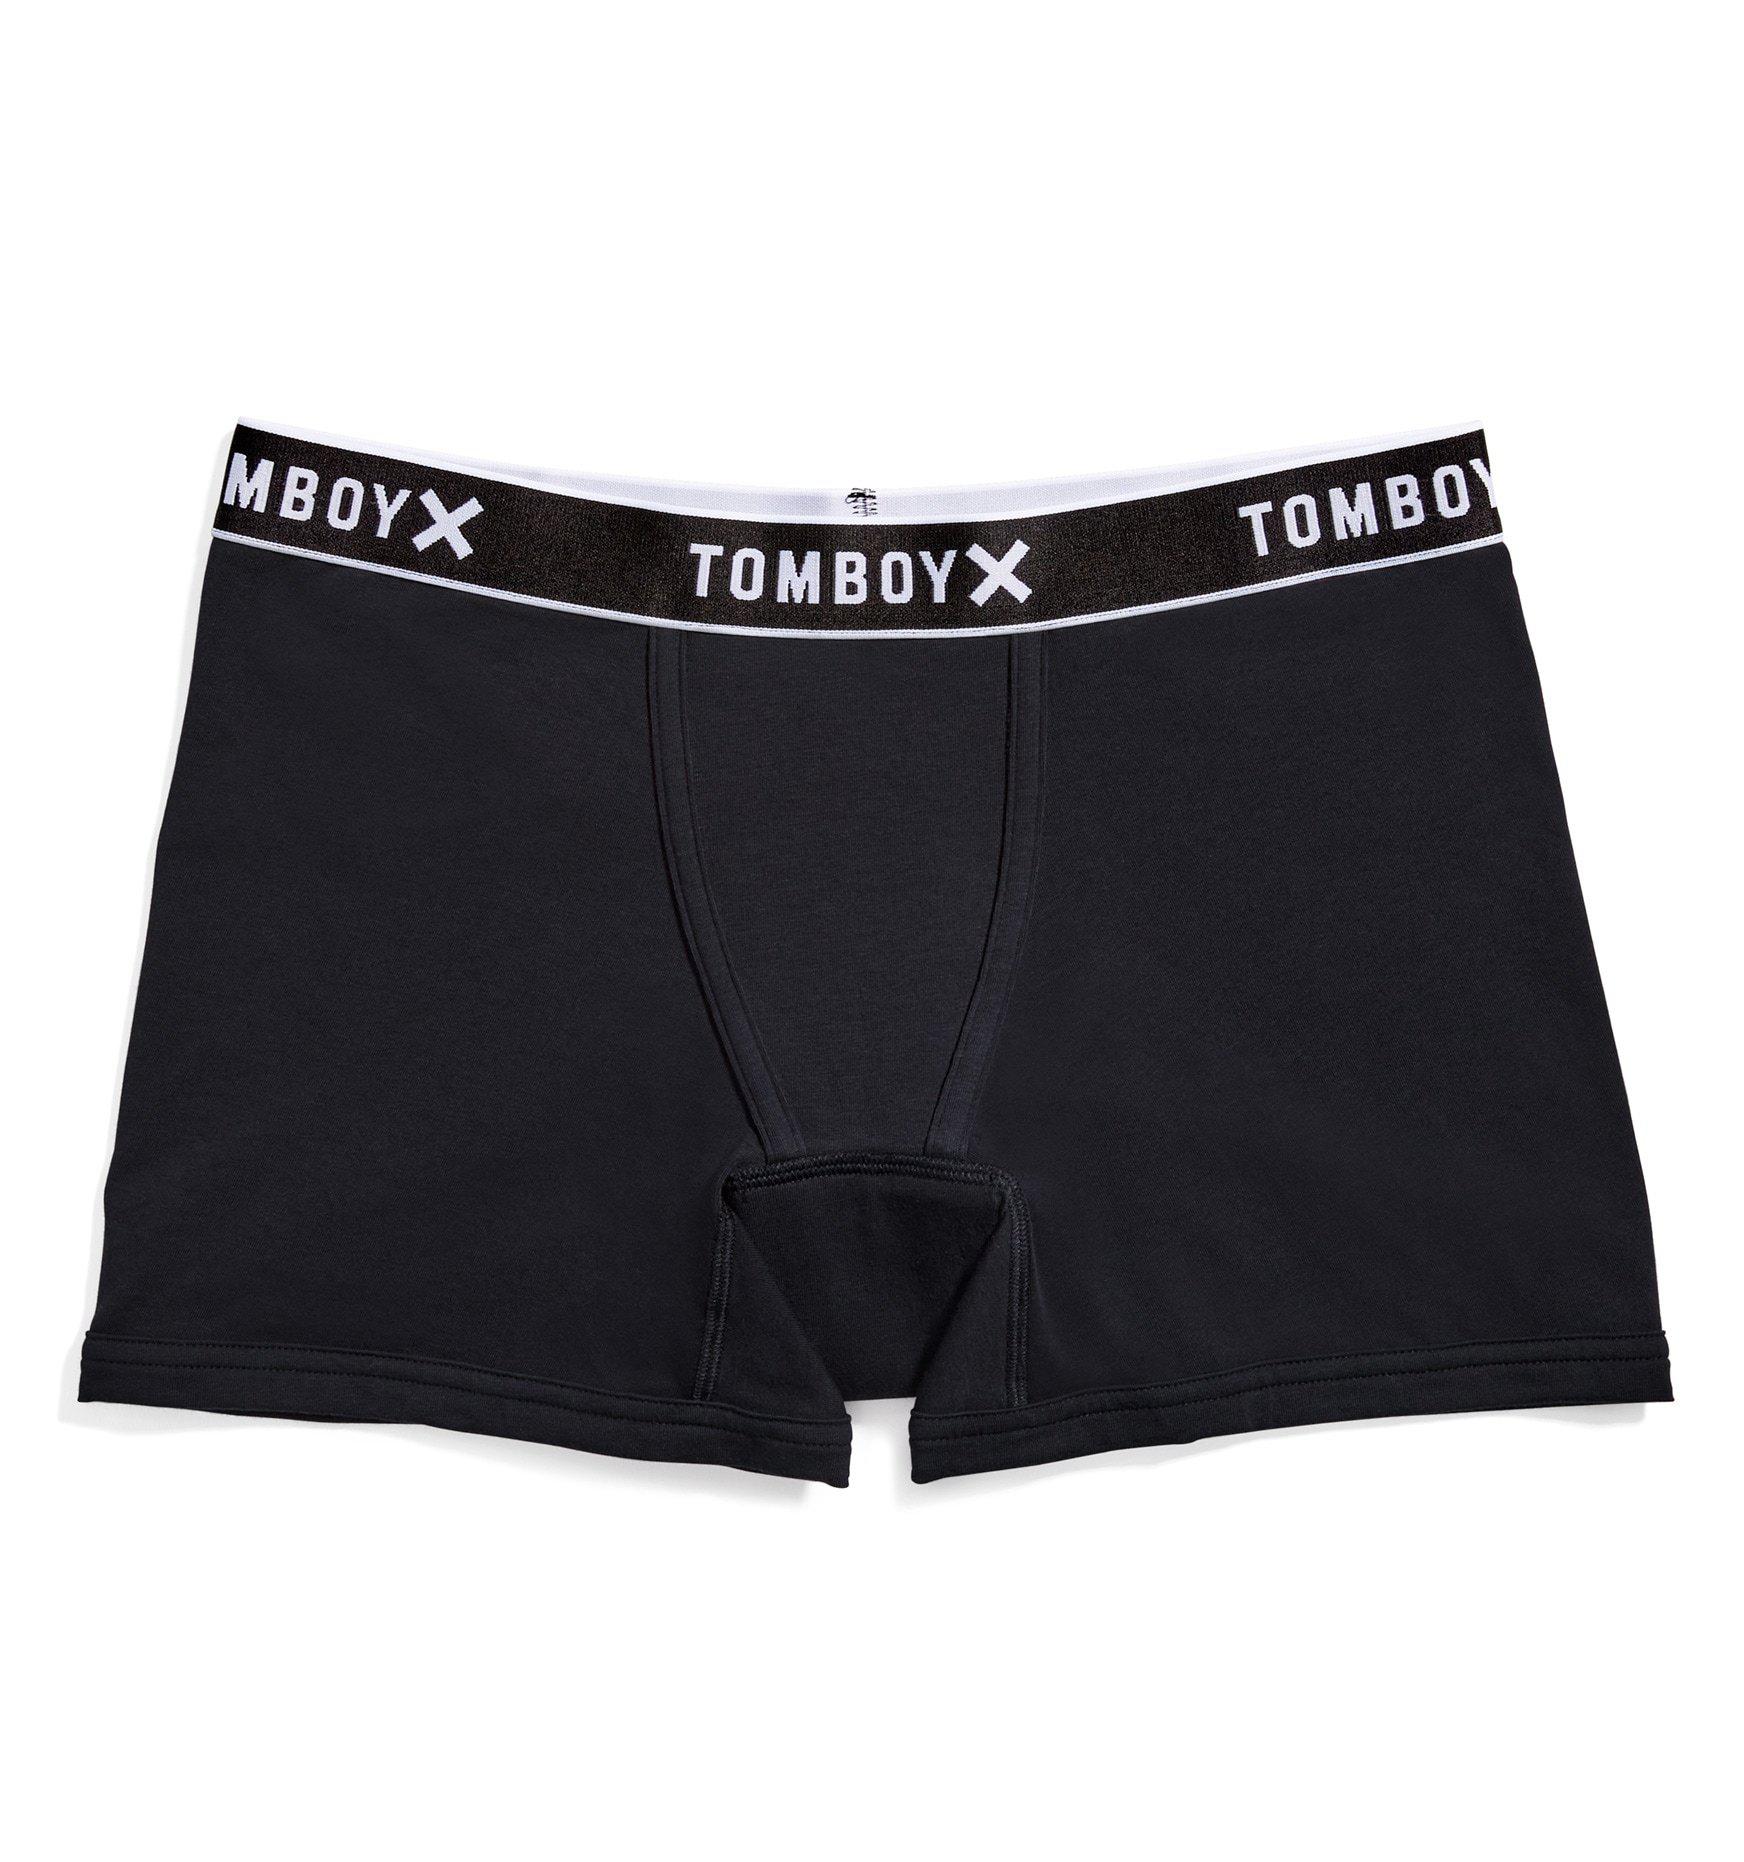 Tootles - Ready for the only leakproof underwear that checks every